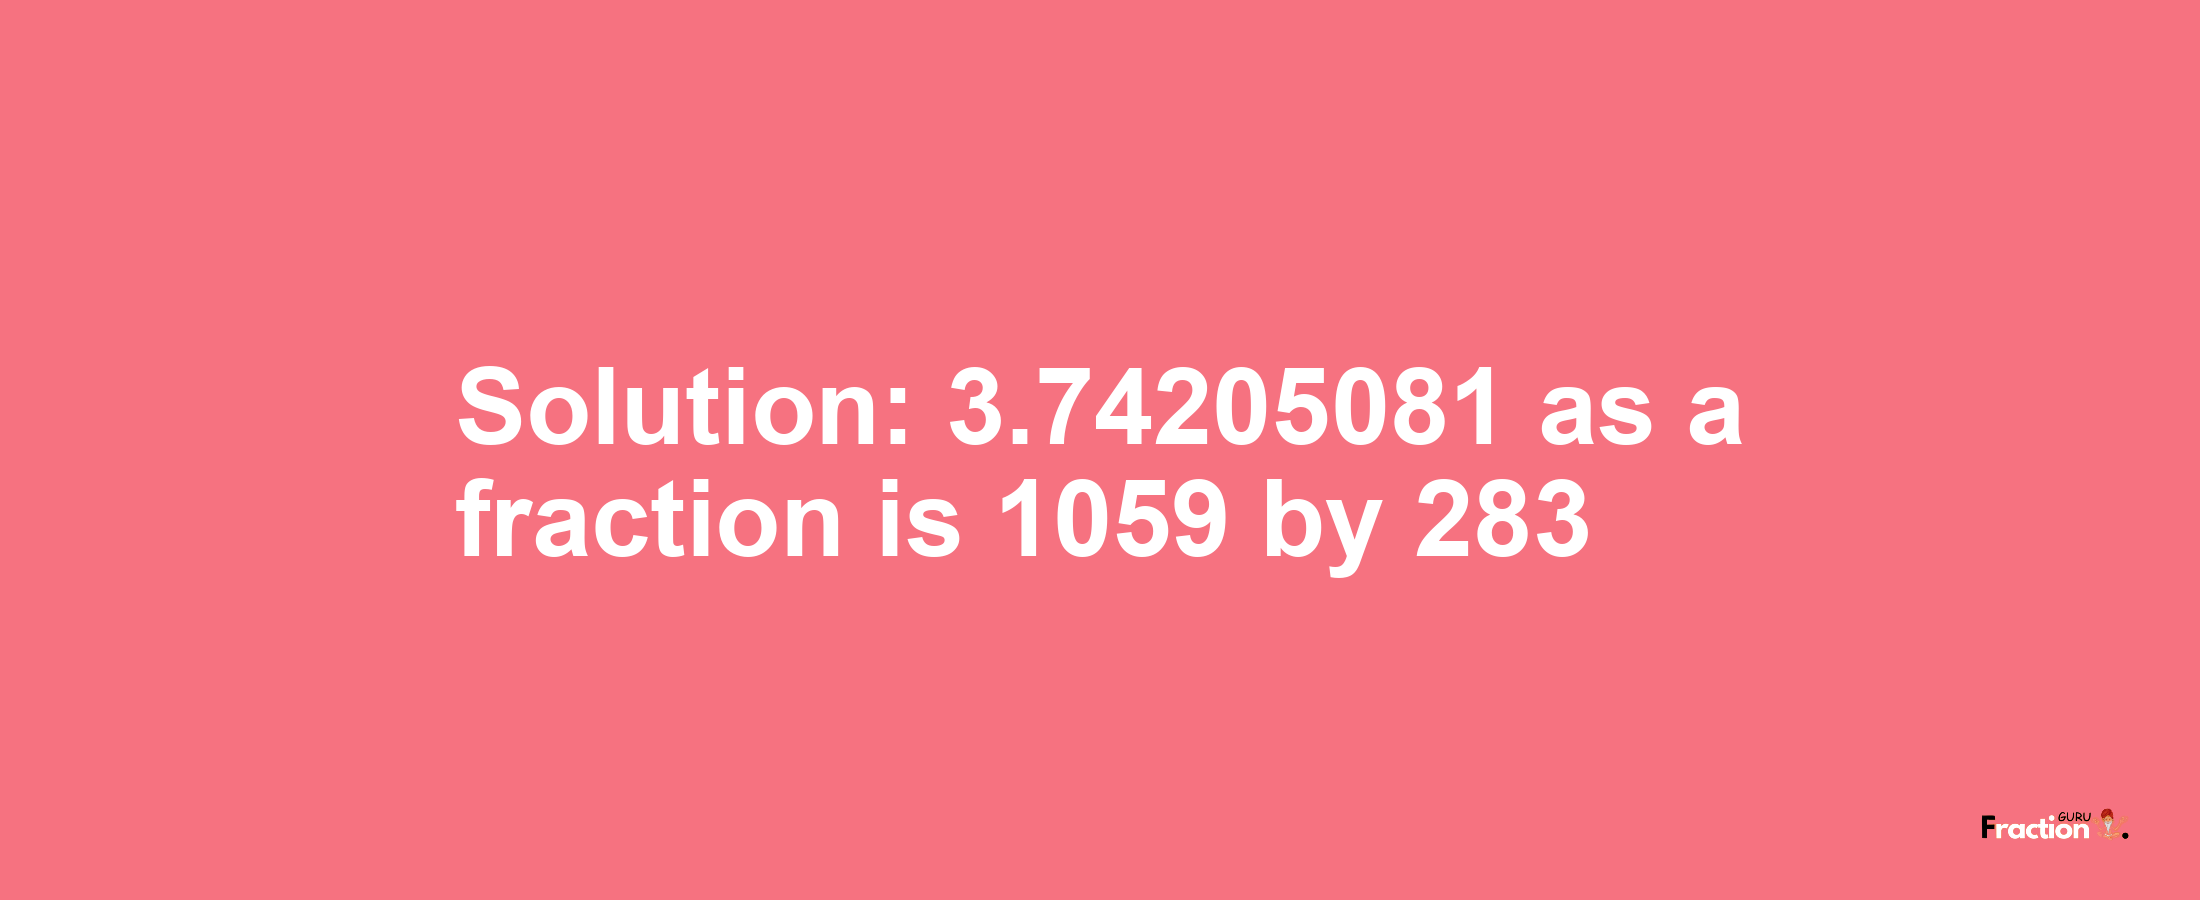 Solution:3.74205081 as a fraction is 1059/283